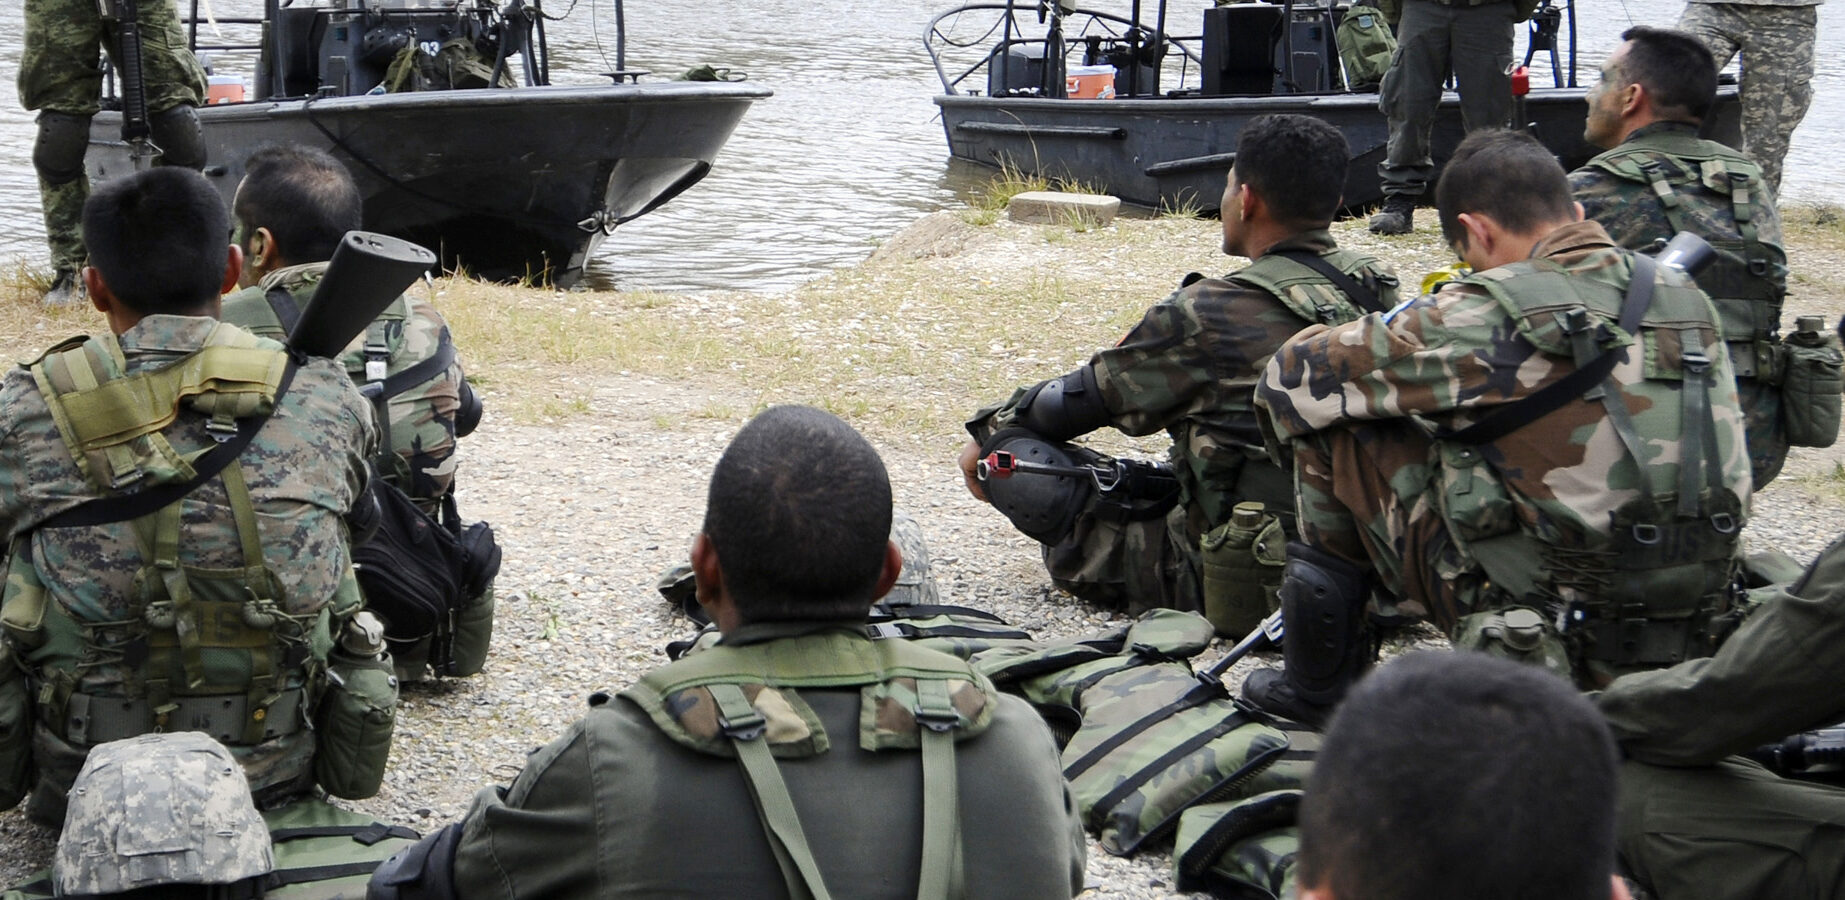 A guest instructor debriefs students from the Western Hemisphere Institute for Security Cooperation and Naval Small Craft Instruction and Technical Training School after a field training exercise. (U.S. Navy photo)